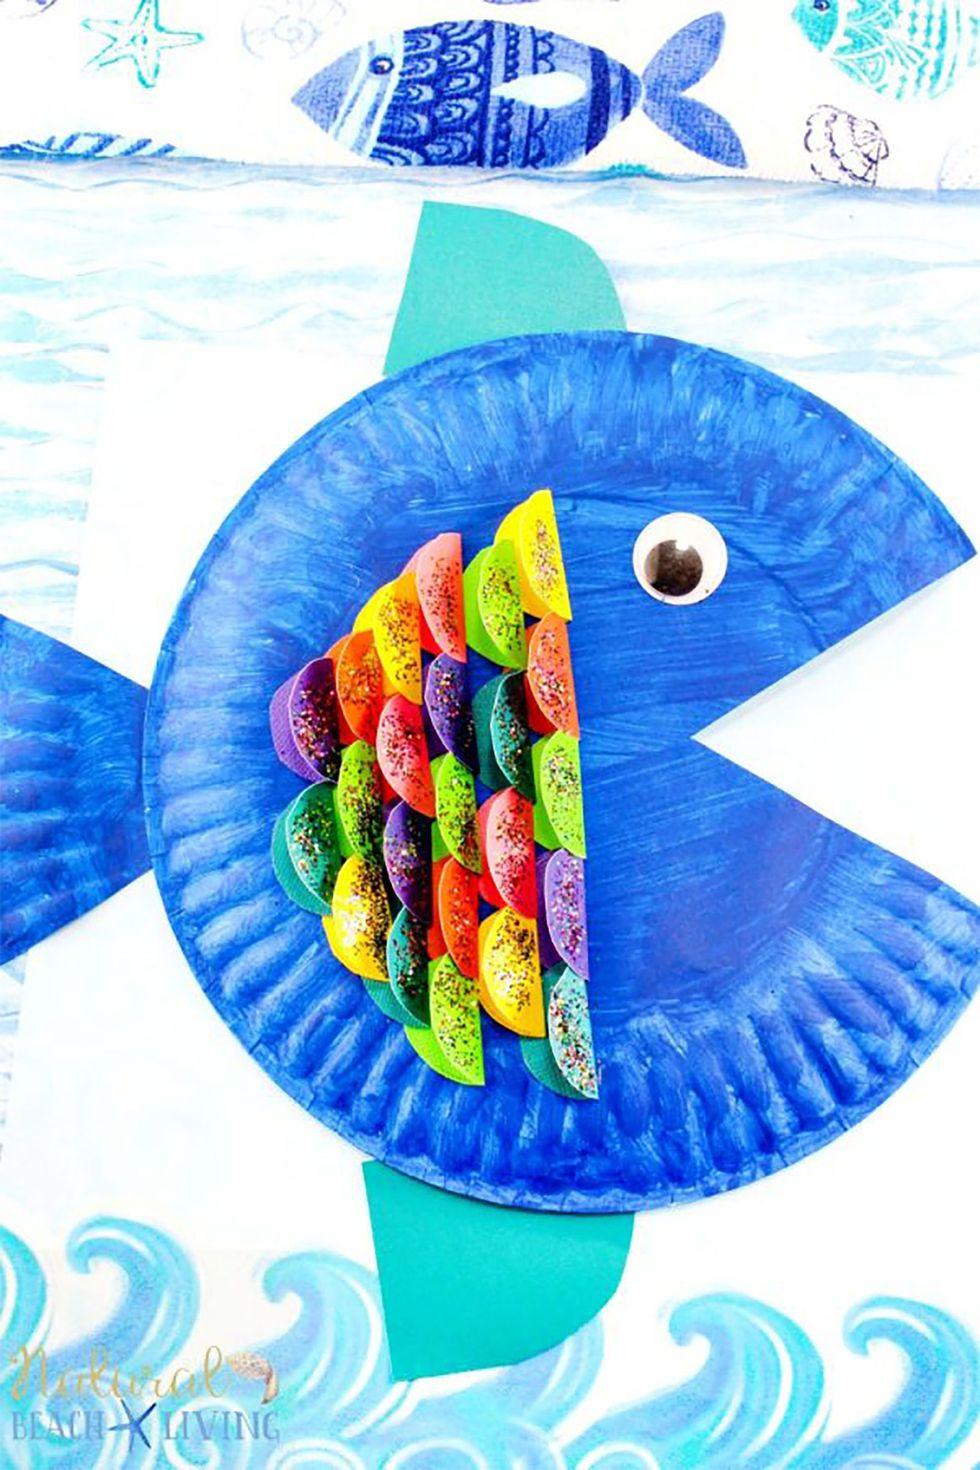 Paper Plate Rainbow Fish - Crafts for Kids - 4aKid